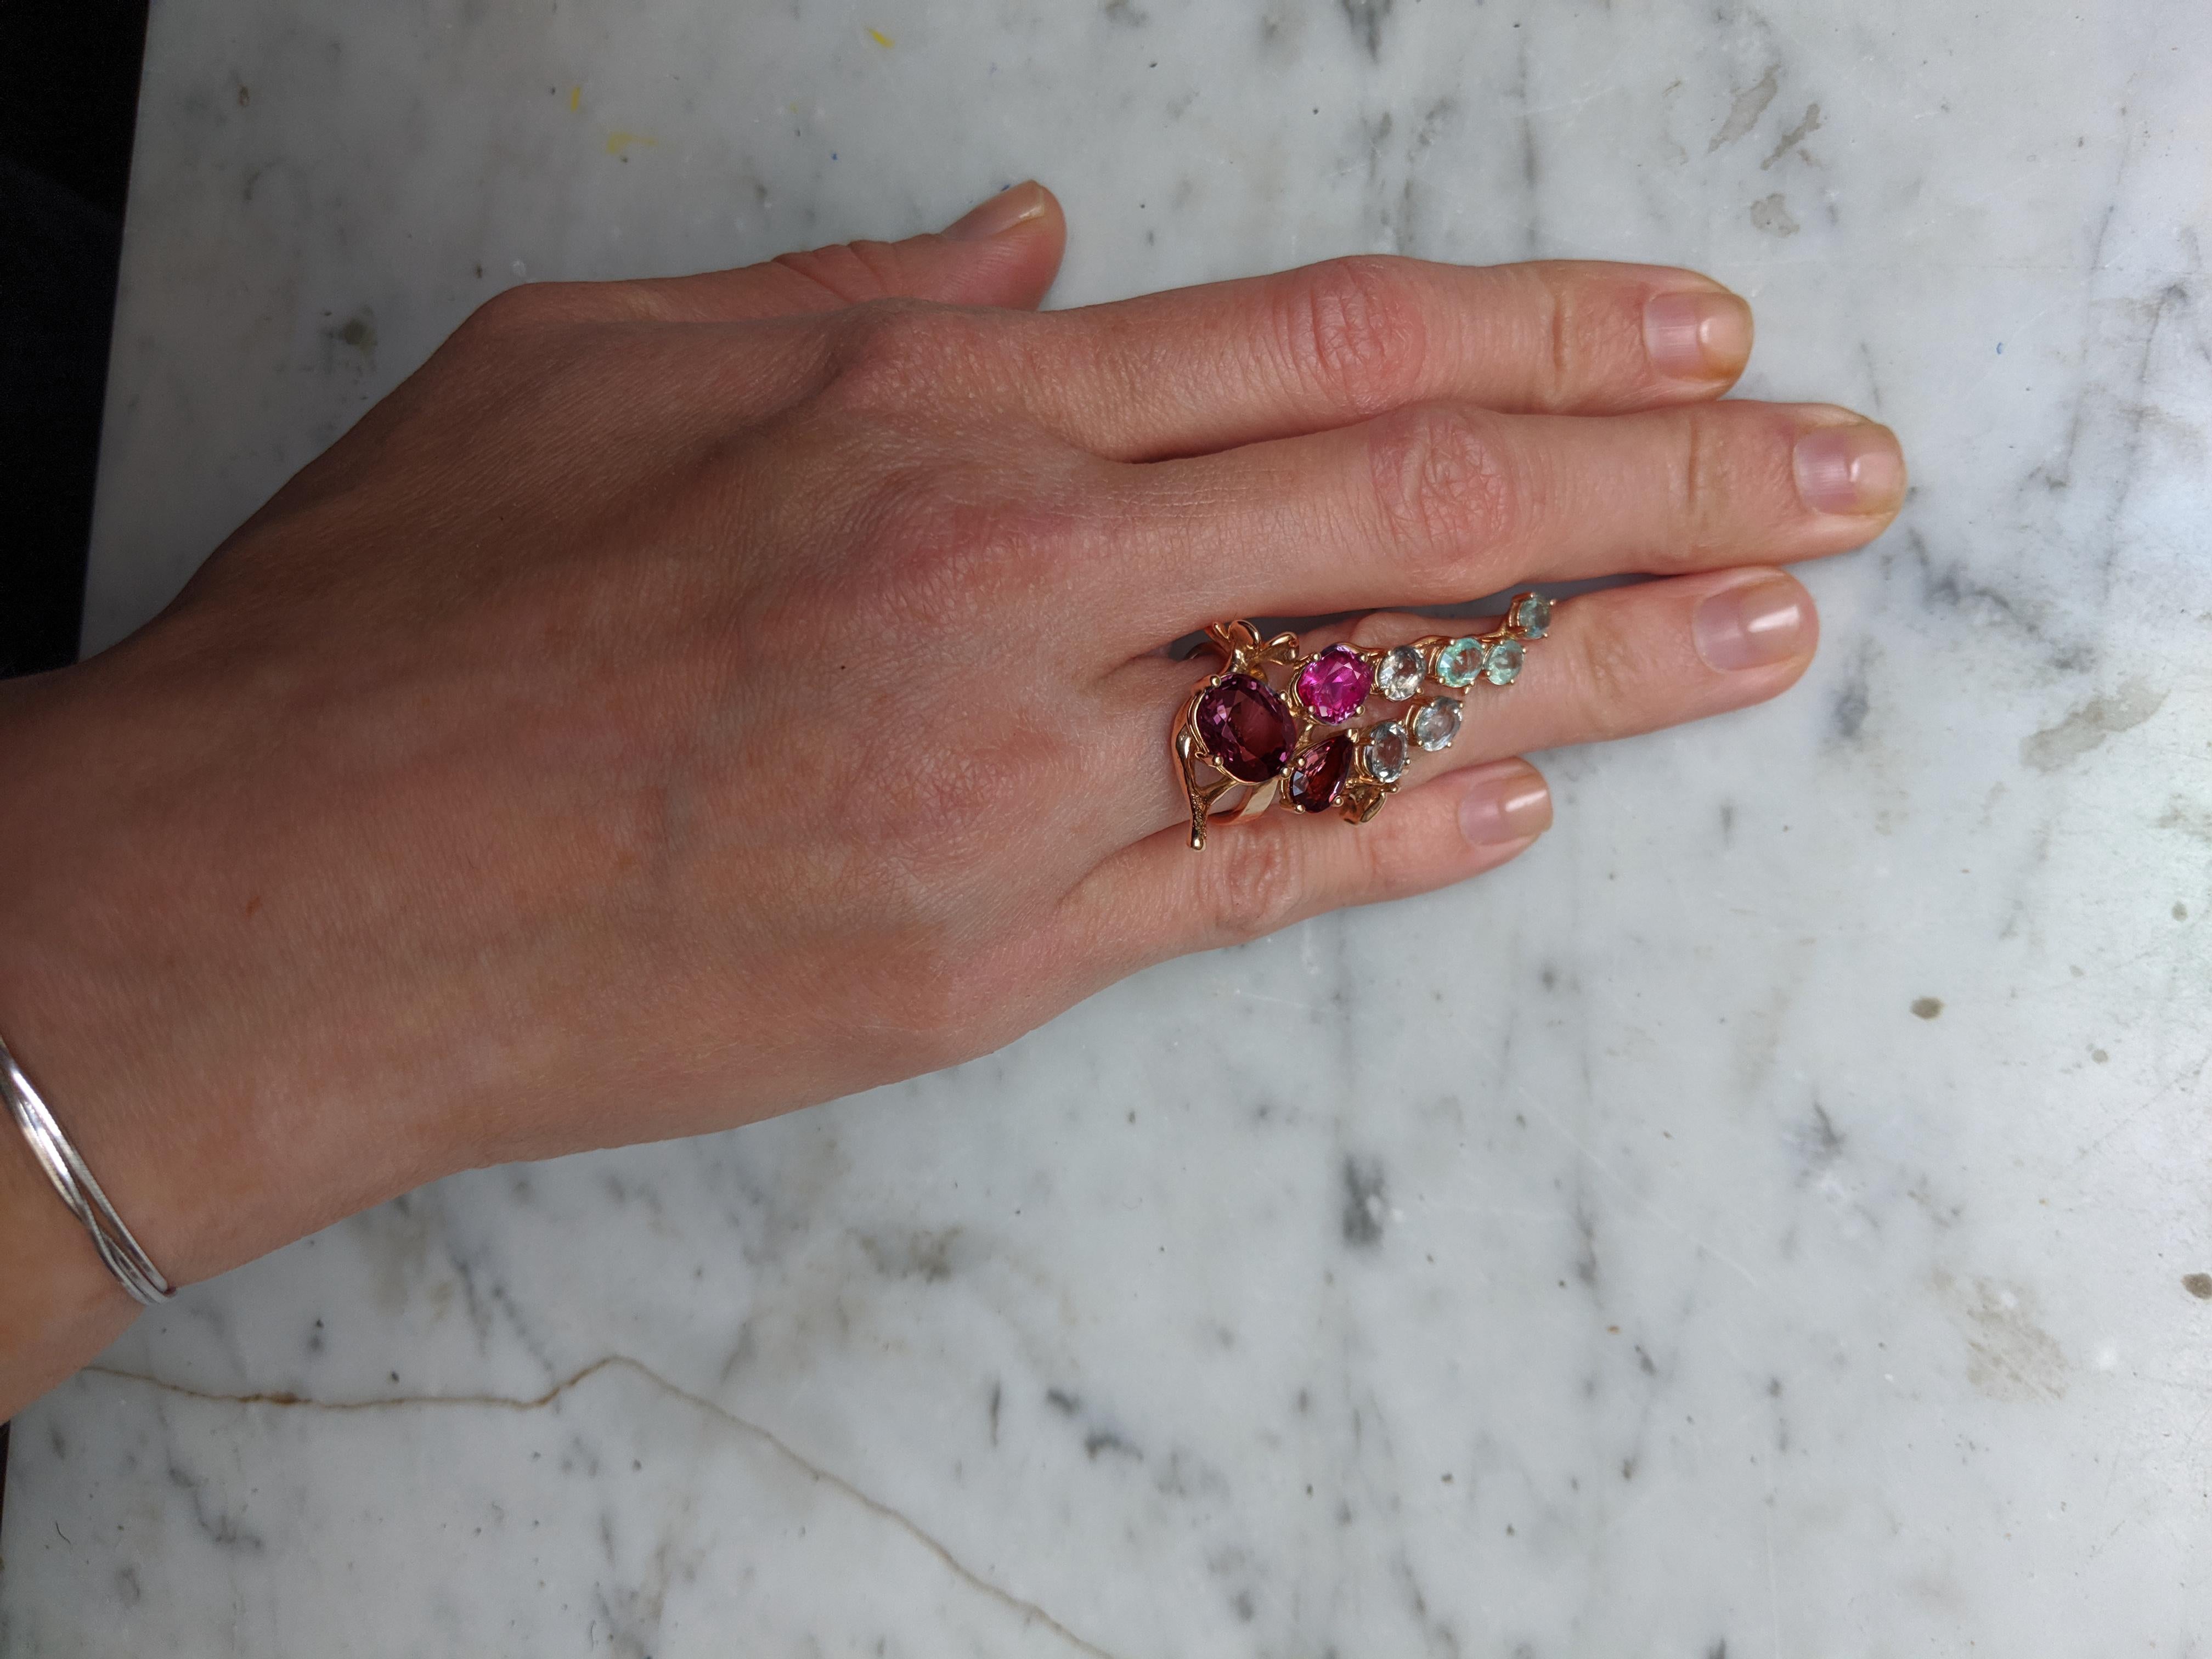 This Tobacco Flower cocktail ring is made of 18 karat rose gold and features a stunning array of natural gems including:

Oval ruby 4.27 carats, dimensions: 11.16x9.36 mm
Oval ruby 0.98 carats, 7x5.5 mm
Oval ruby with a warmer tone, 1.01 carats,